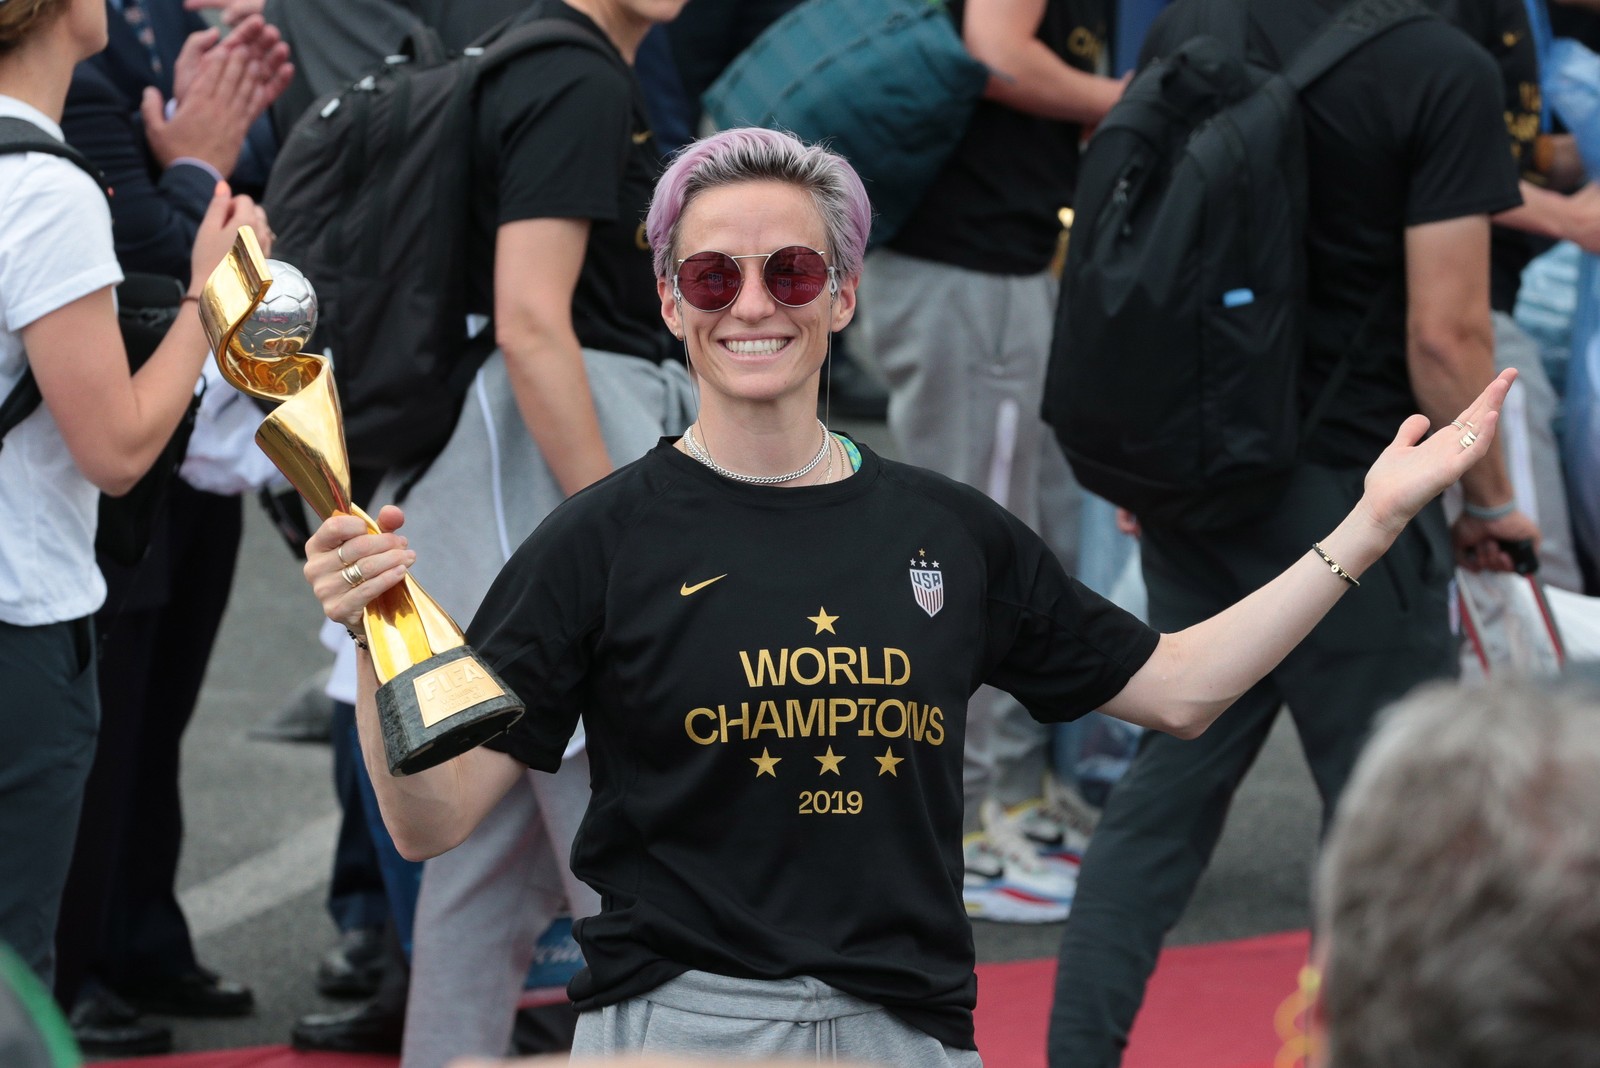 2019-07-08t214341z-47247136-nocid-rtrmadp-3-soccer-women-s-world-cup-champions-airport-arrival.jpg